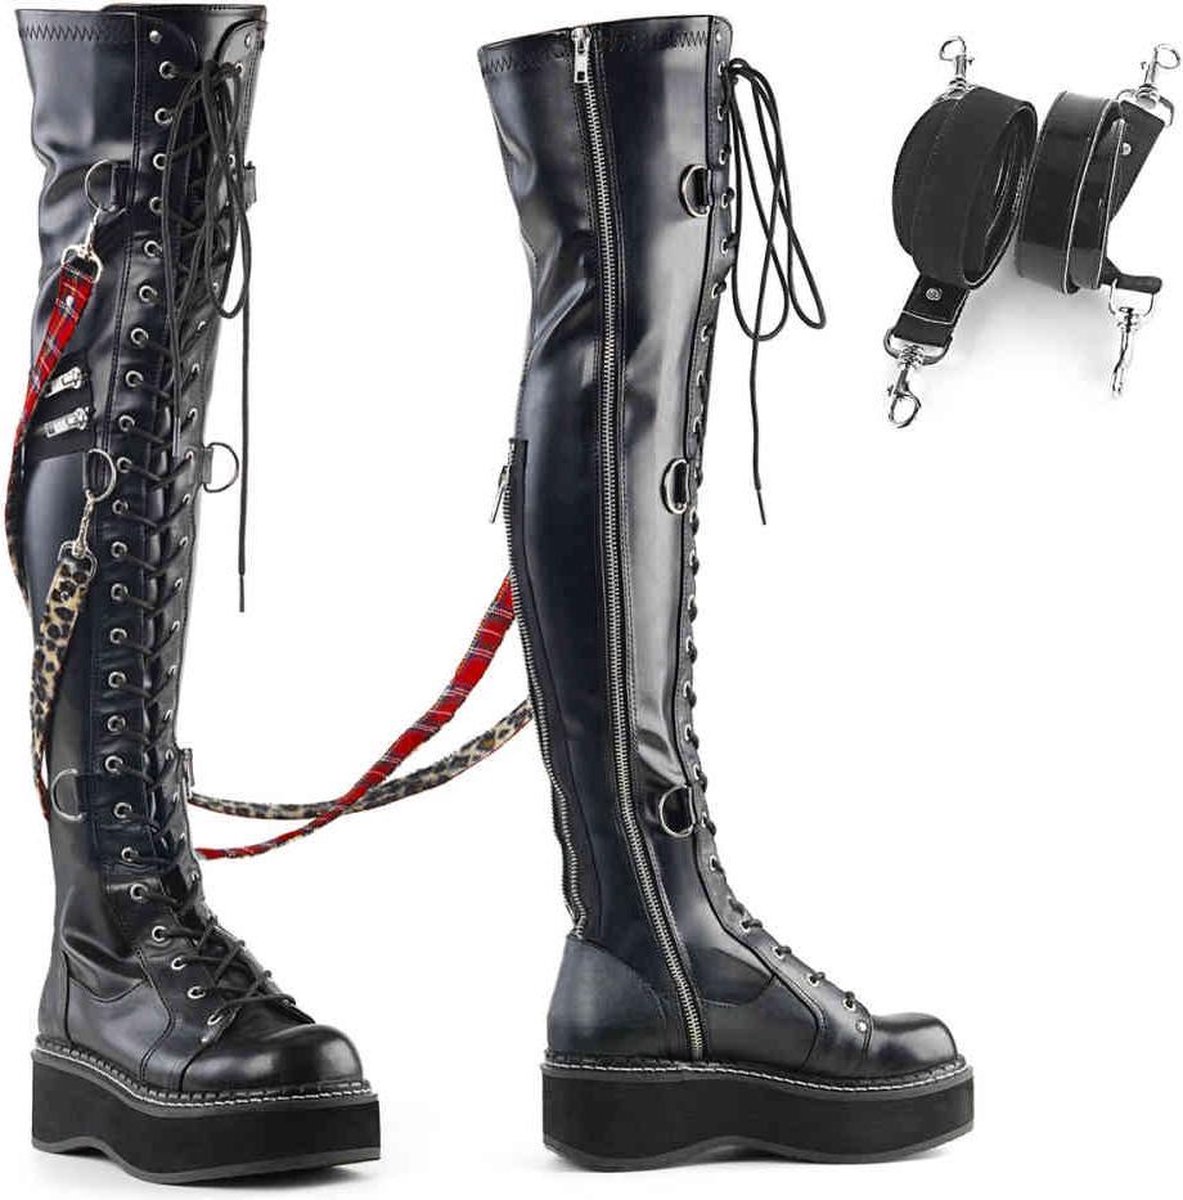 EU 40 = US 10 | EMILY-377 | 2 PF STR Over-the-Knee Lace-Up Boots, Side Zip